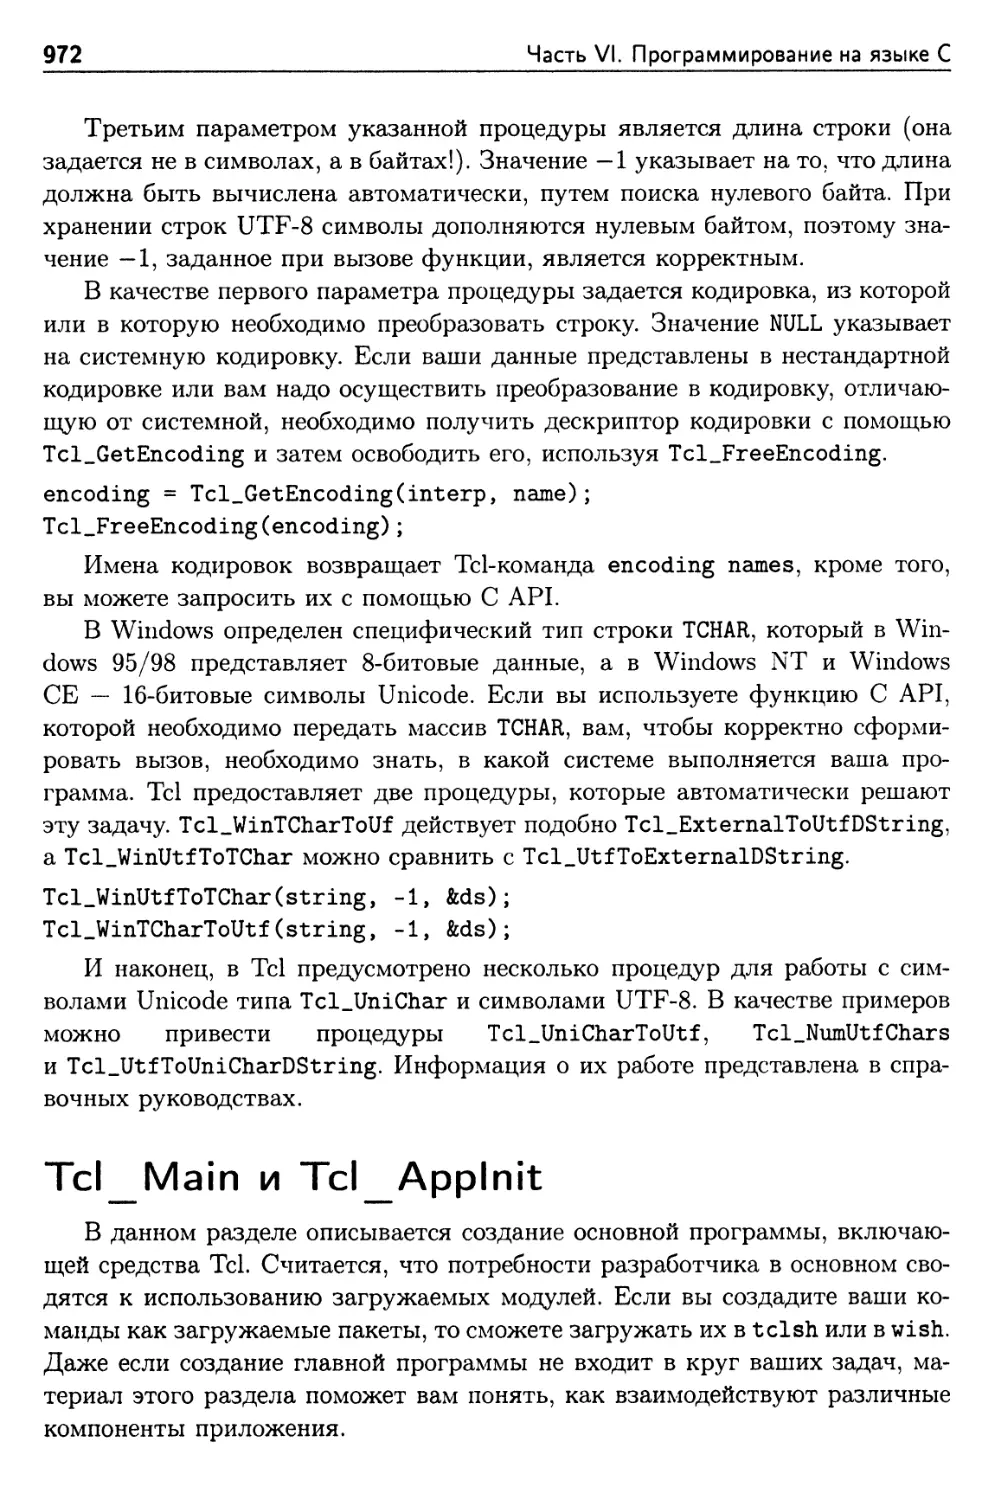 Tcl_Main и Tcl_AppInit